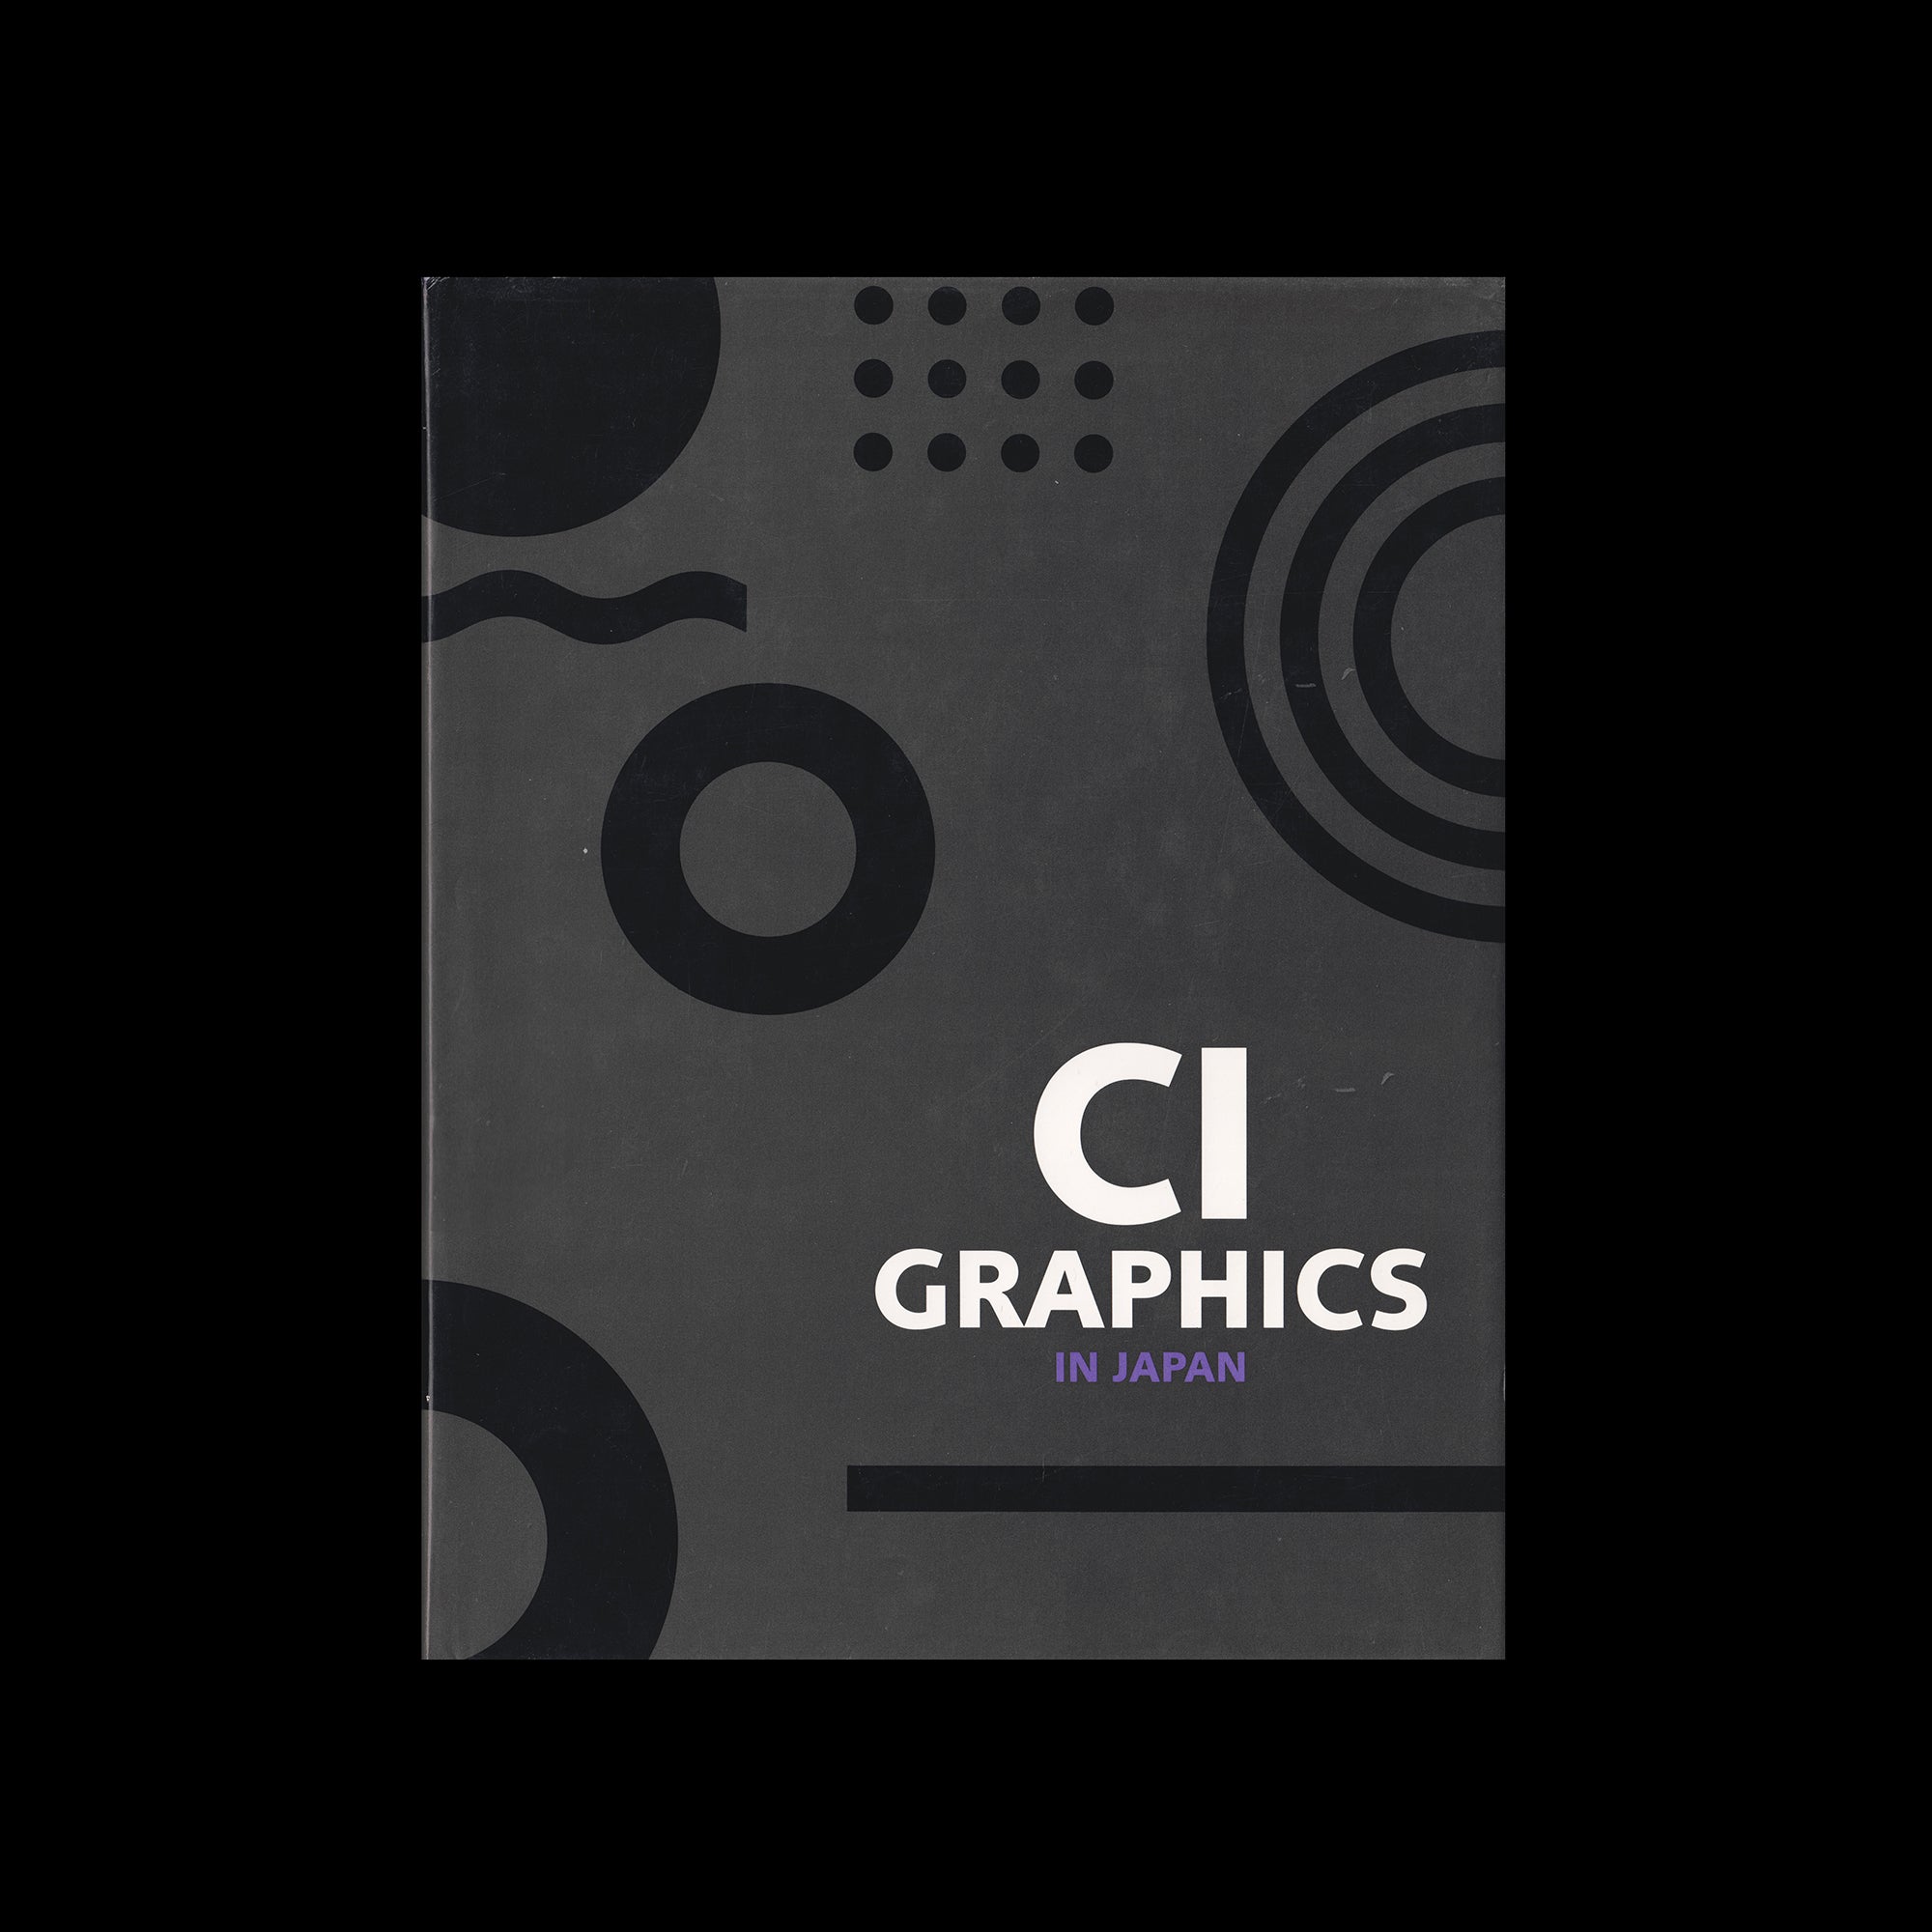 CI Graphics in Japan, 1988